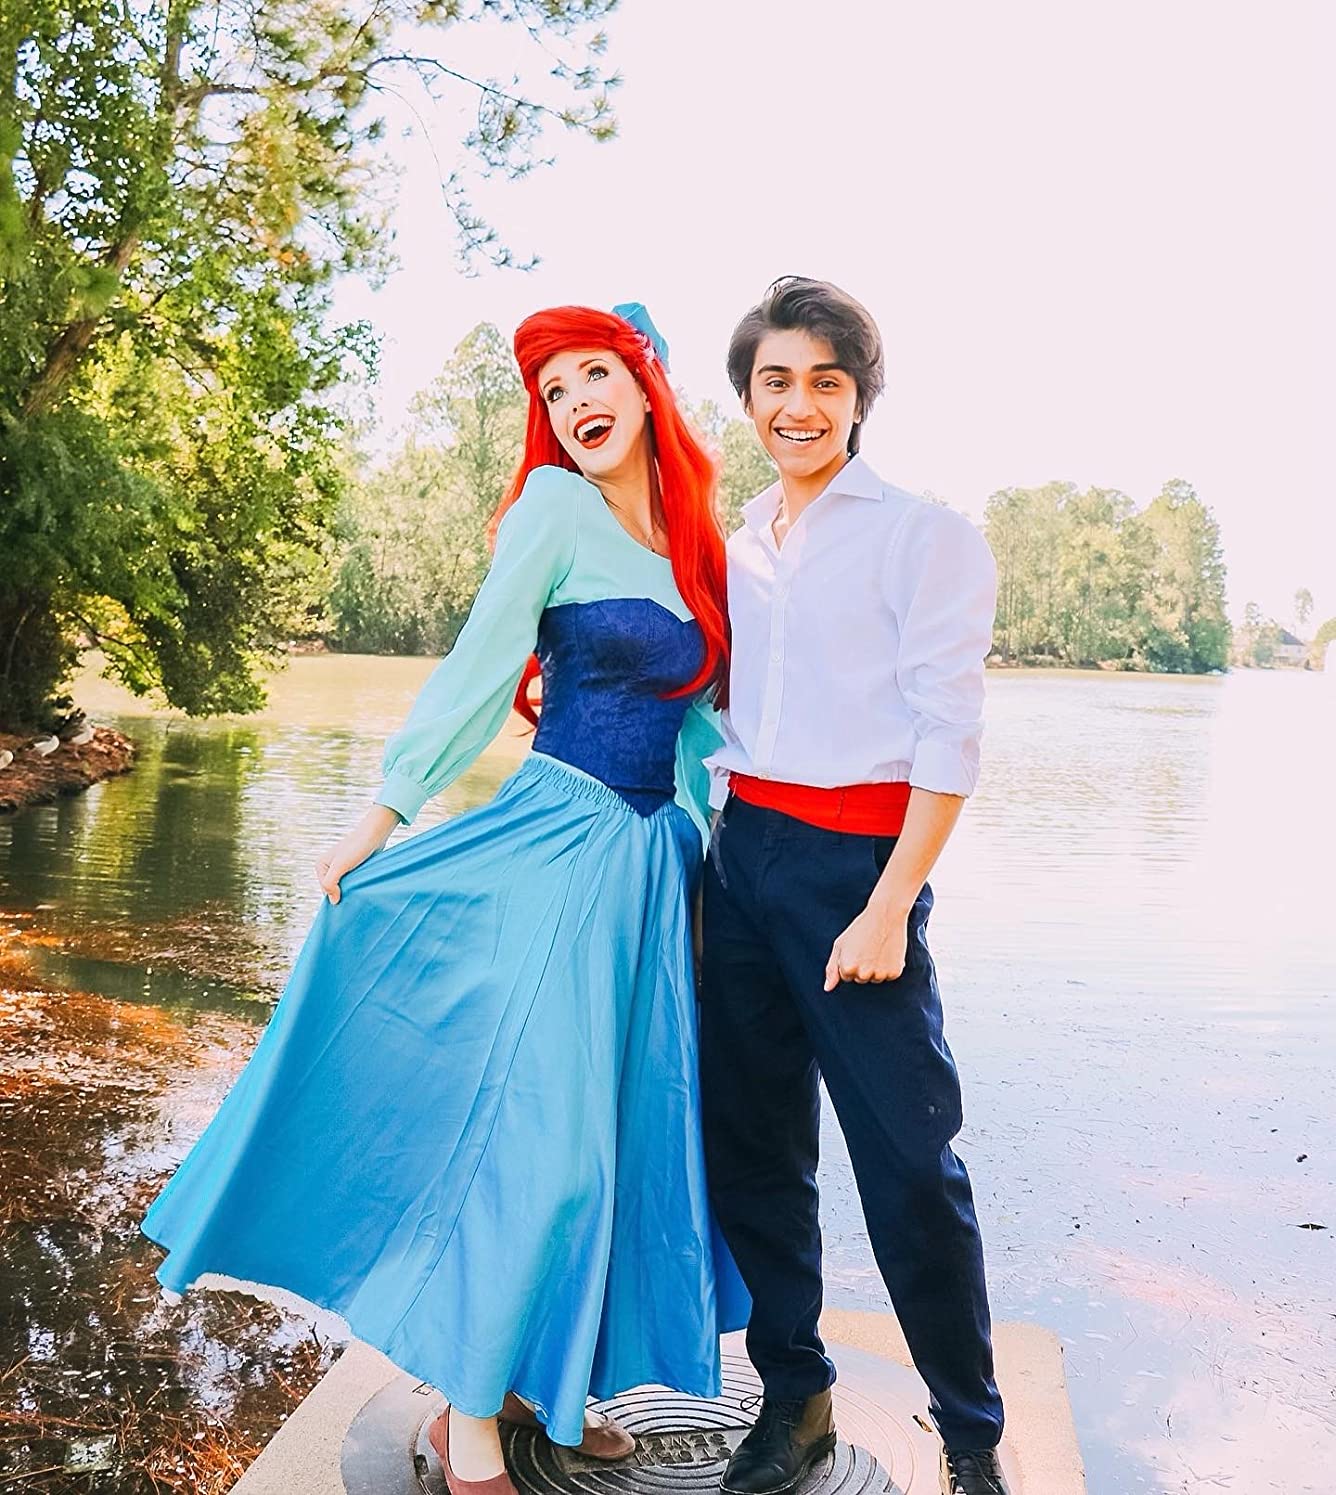 Disney couple costumes Ariel and Eric from The Little Mermaid